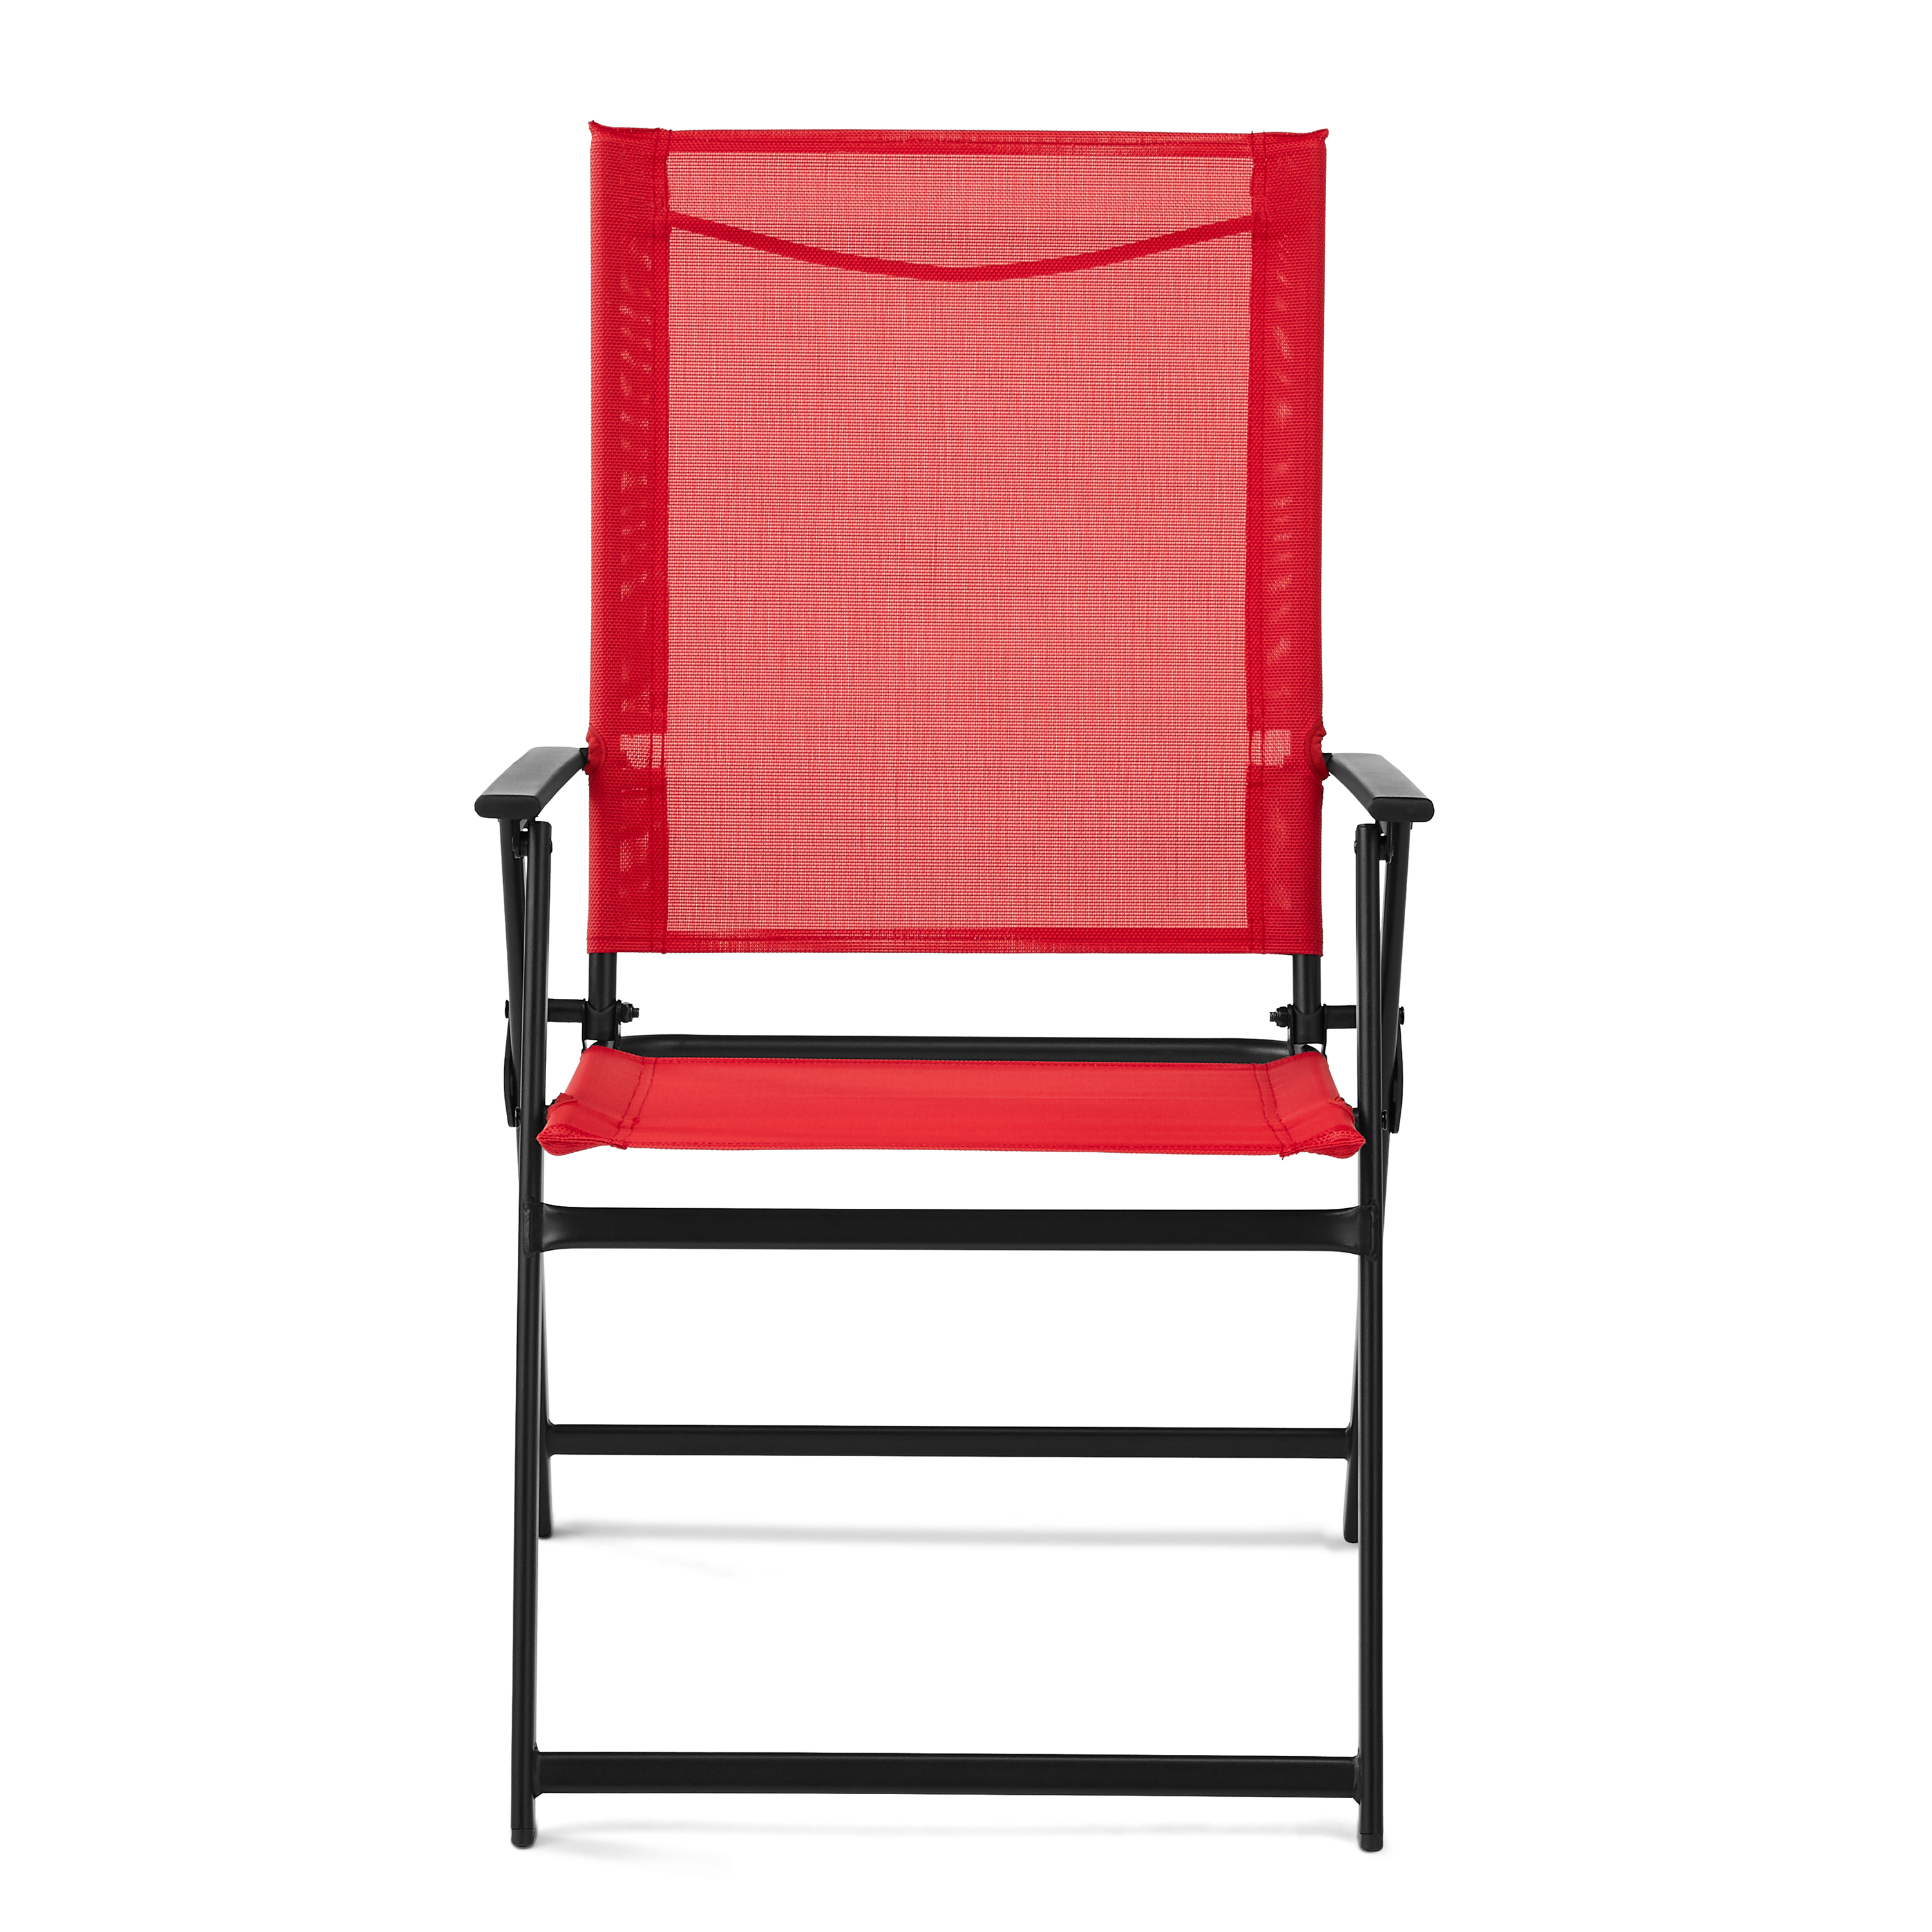 Mainstays Greyson Steel and Sling Folding Outdoor Patio Armchair - Set of 2, Red - image 1 of 8